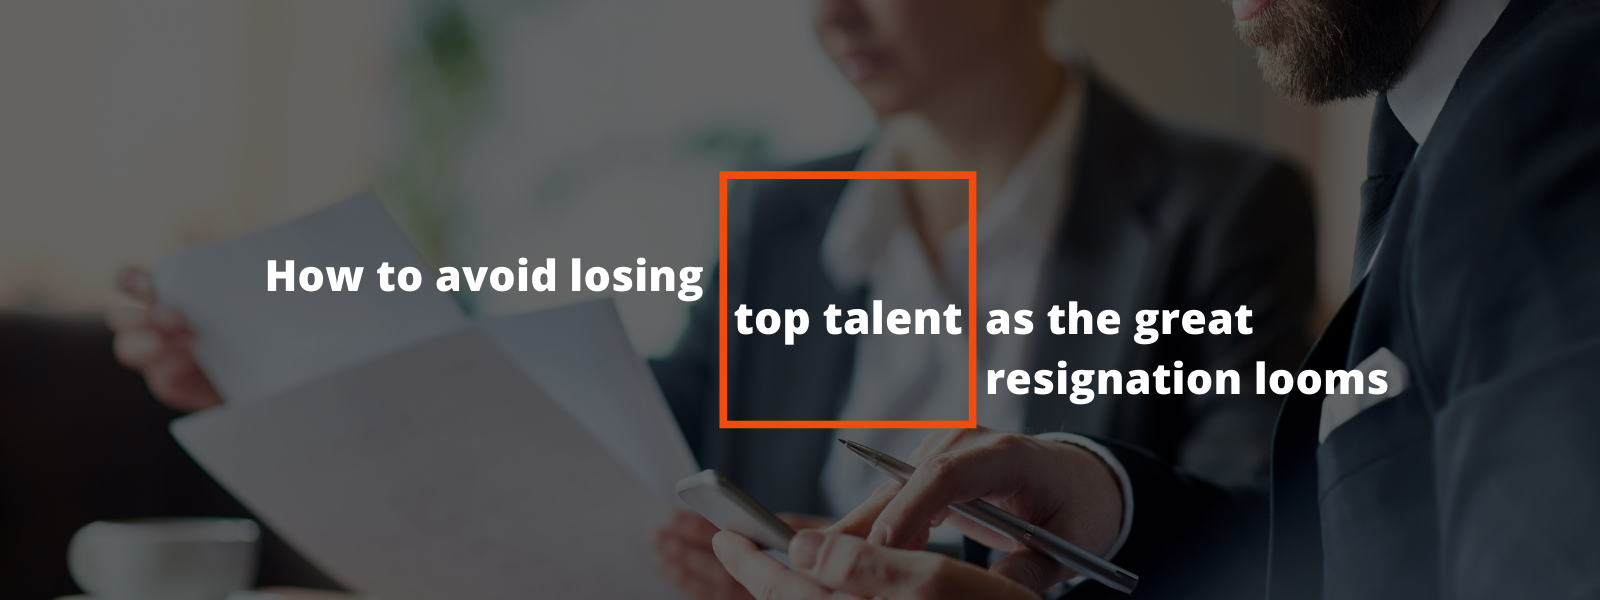 How you can AVOID losing top talent News Banner Image